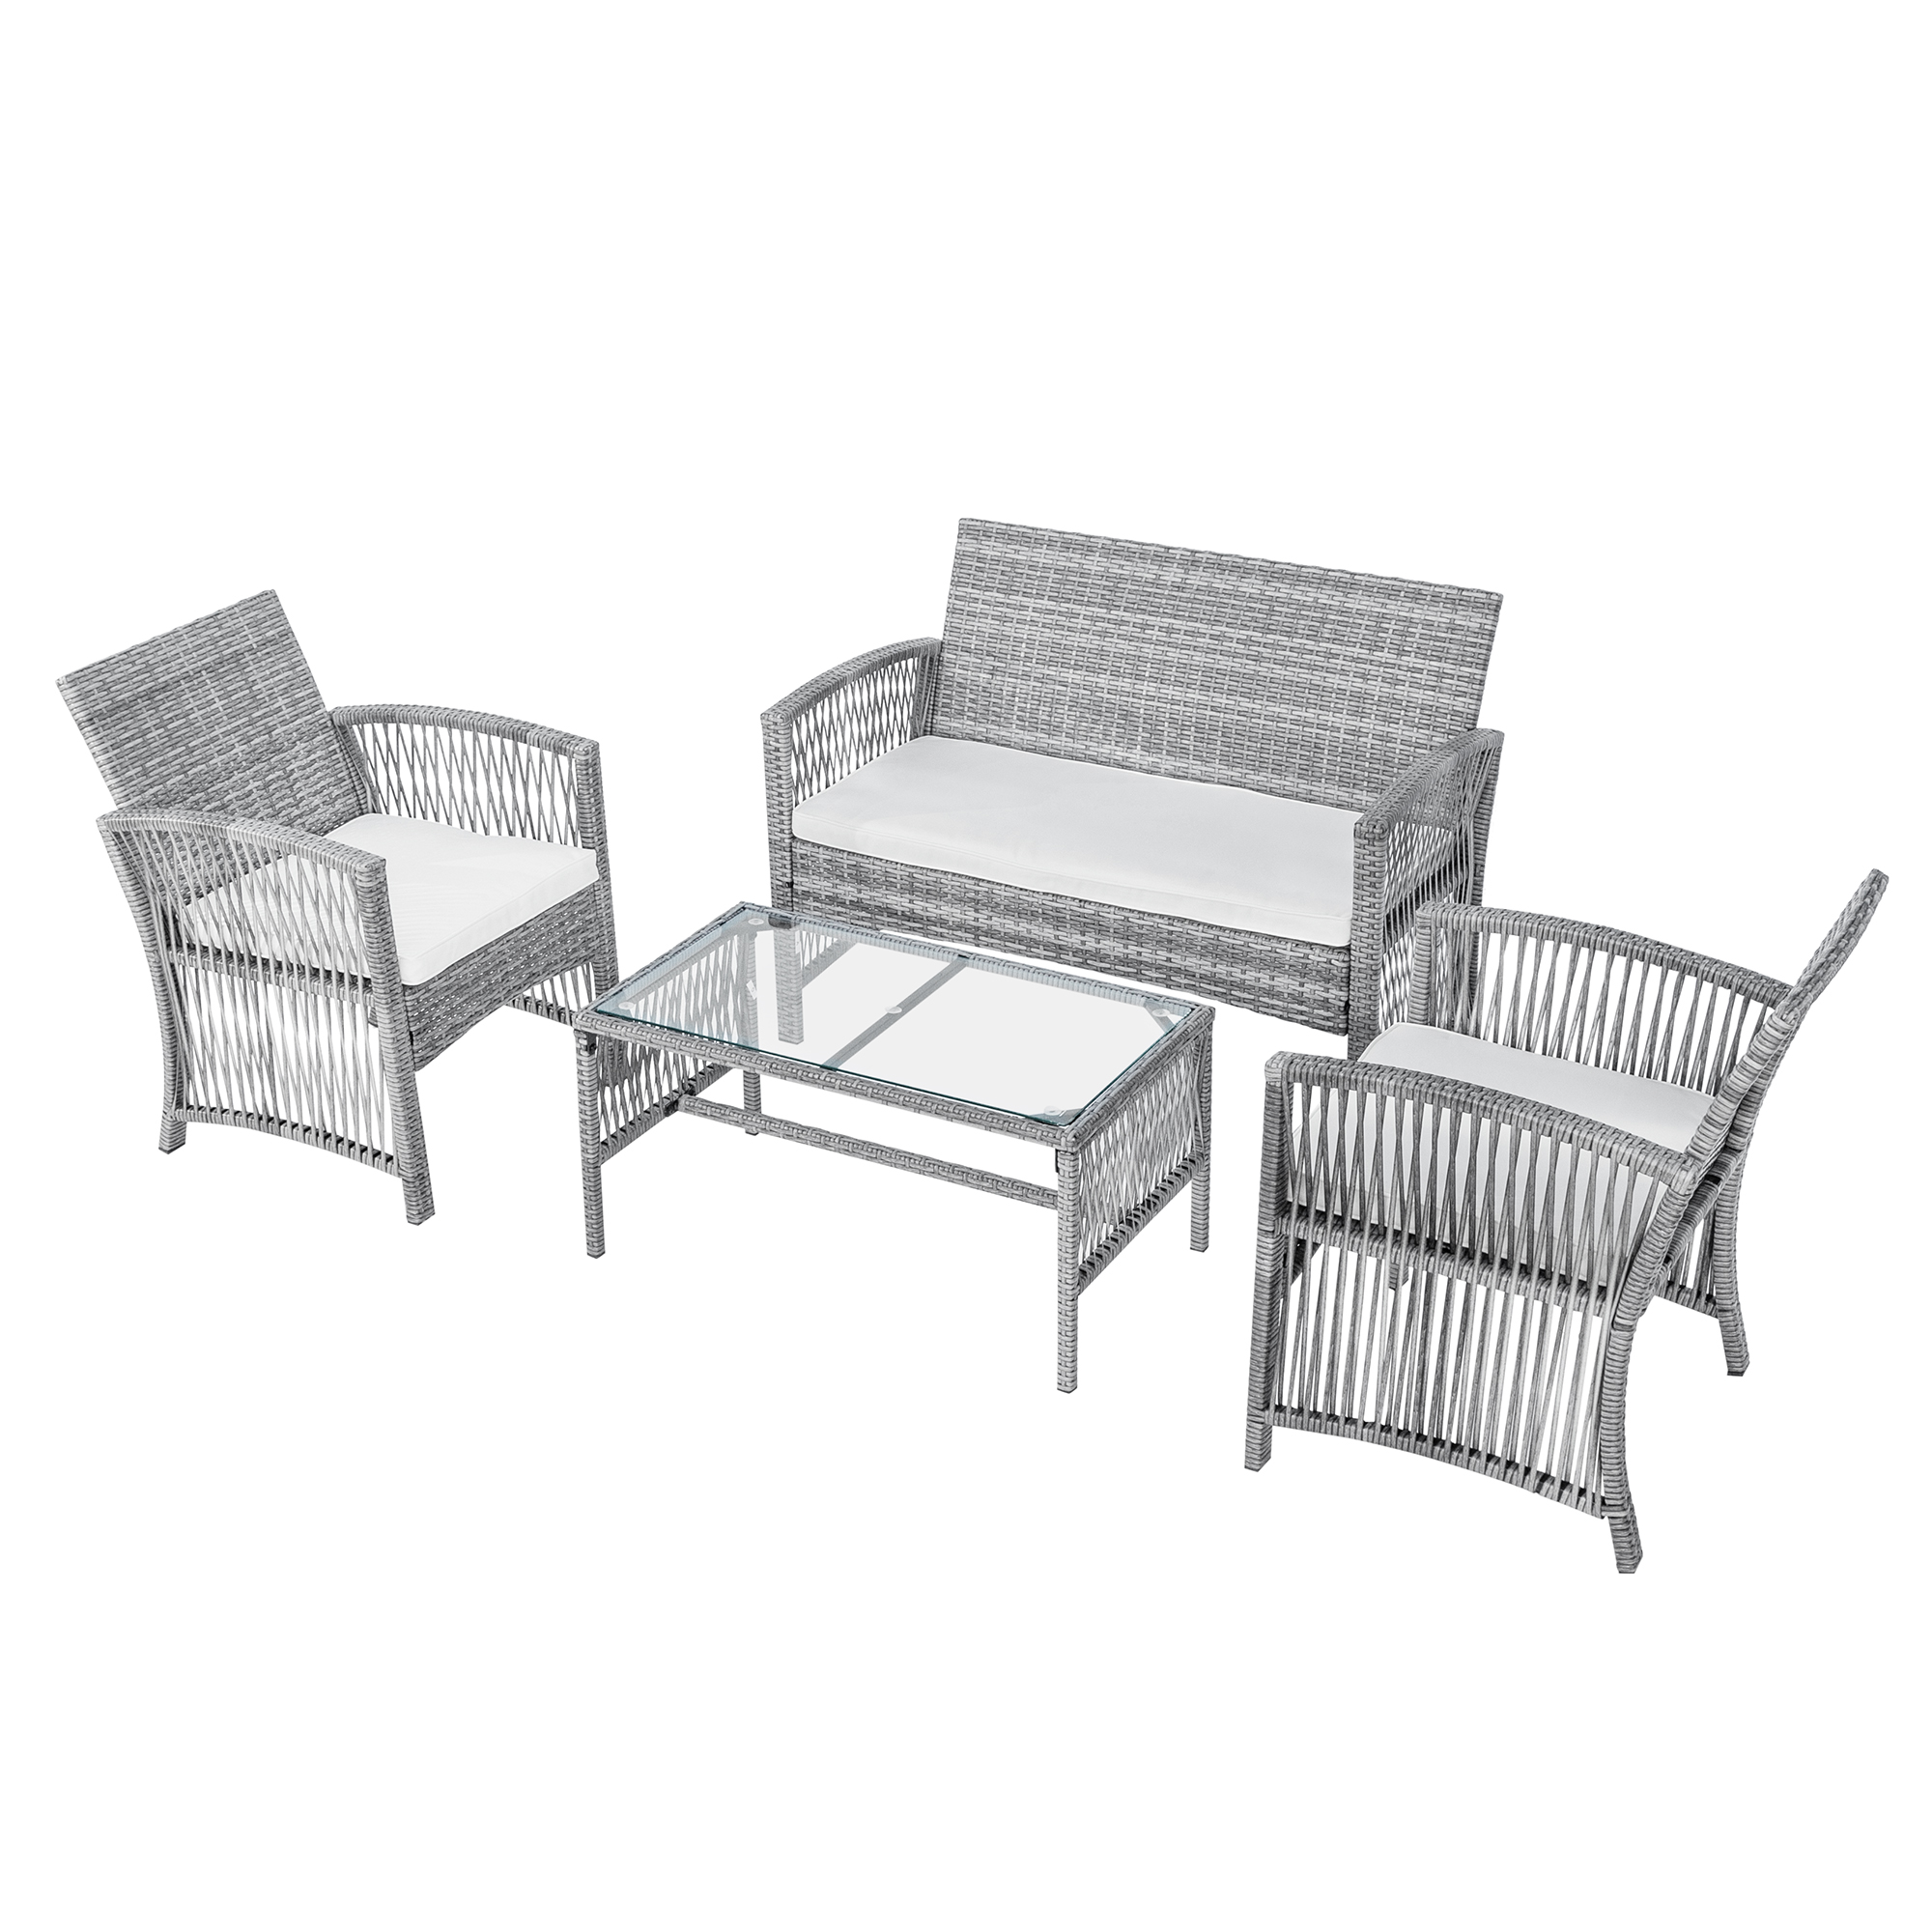 Patio Outdoor Furniture Sets, UHOMEPRO 4 Pieces PE Rattan Garden Furniture Wicker Chairs Set with Coffee Table, Outdoor Conversation Sets, Patio Dining Set for Backyard Poolside Porch, Gray, W7764 - image 4 of 11